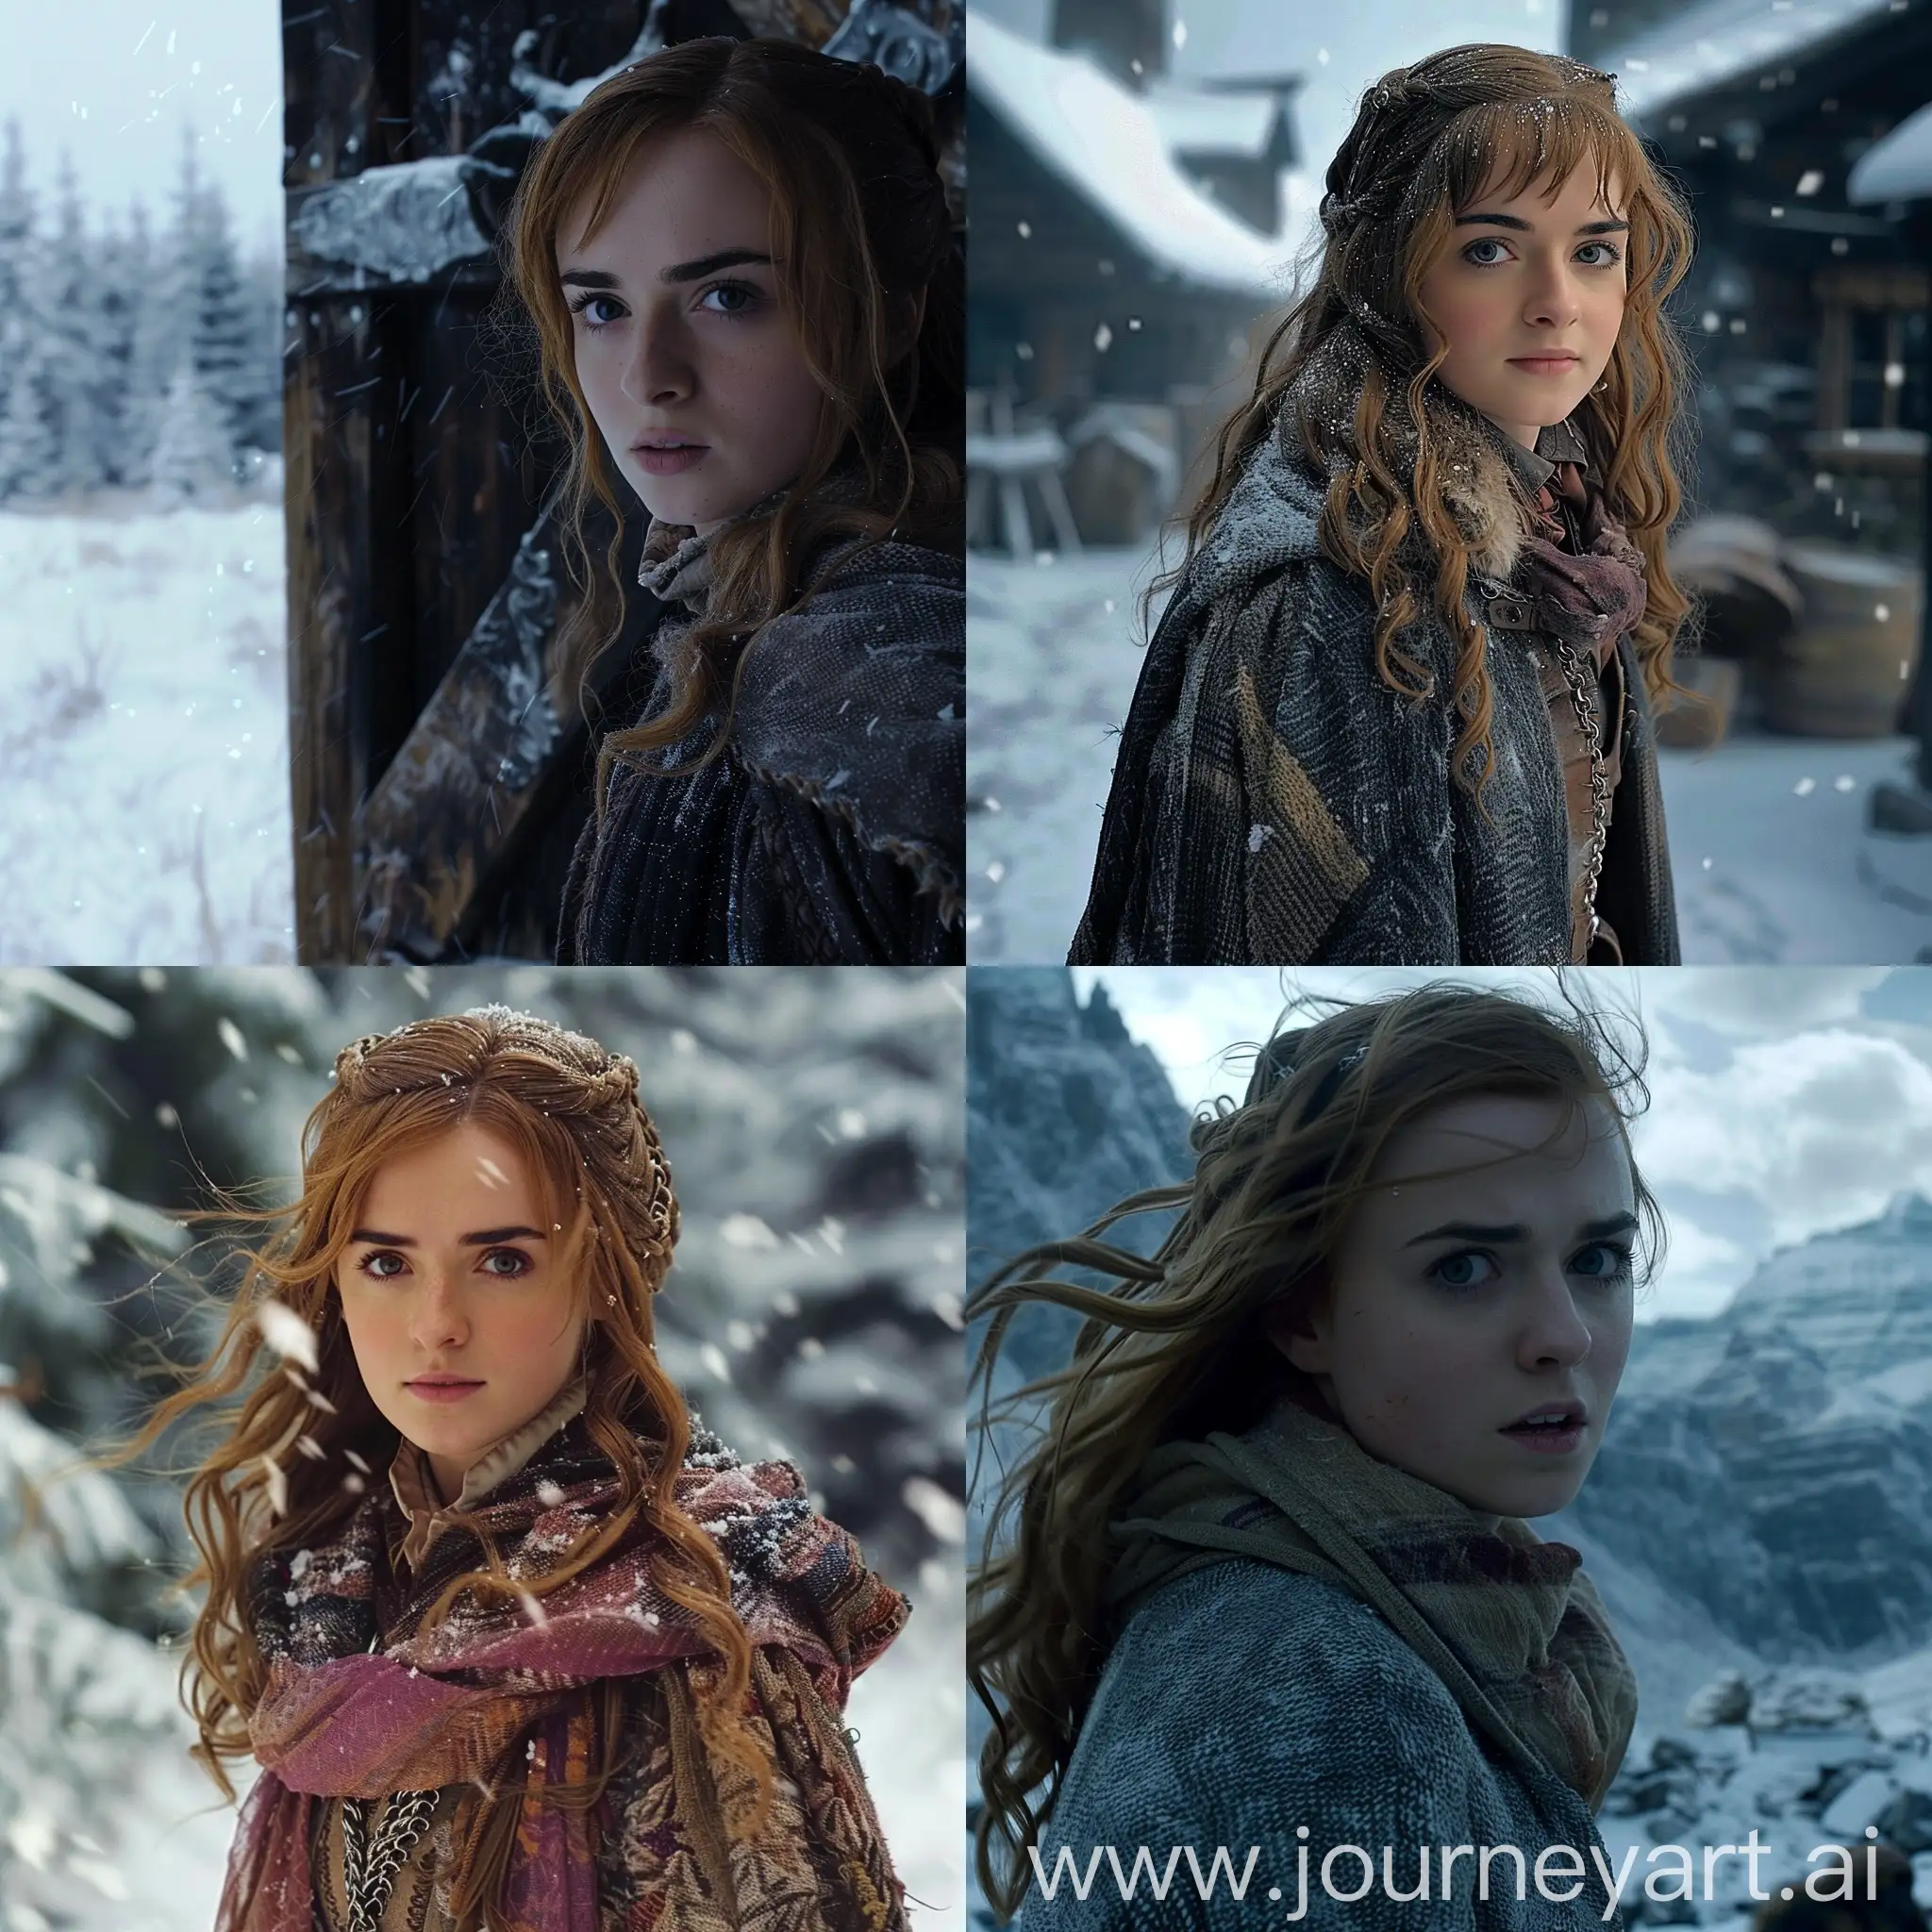 Hermione Granger in Game of Thrones. in the north near Winterfell.